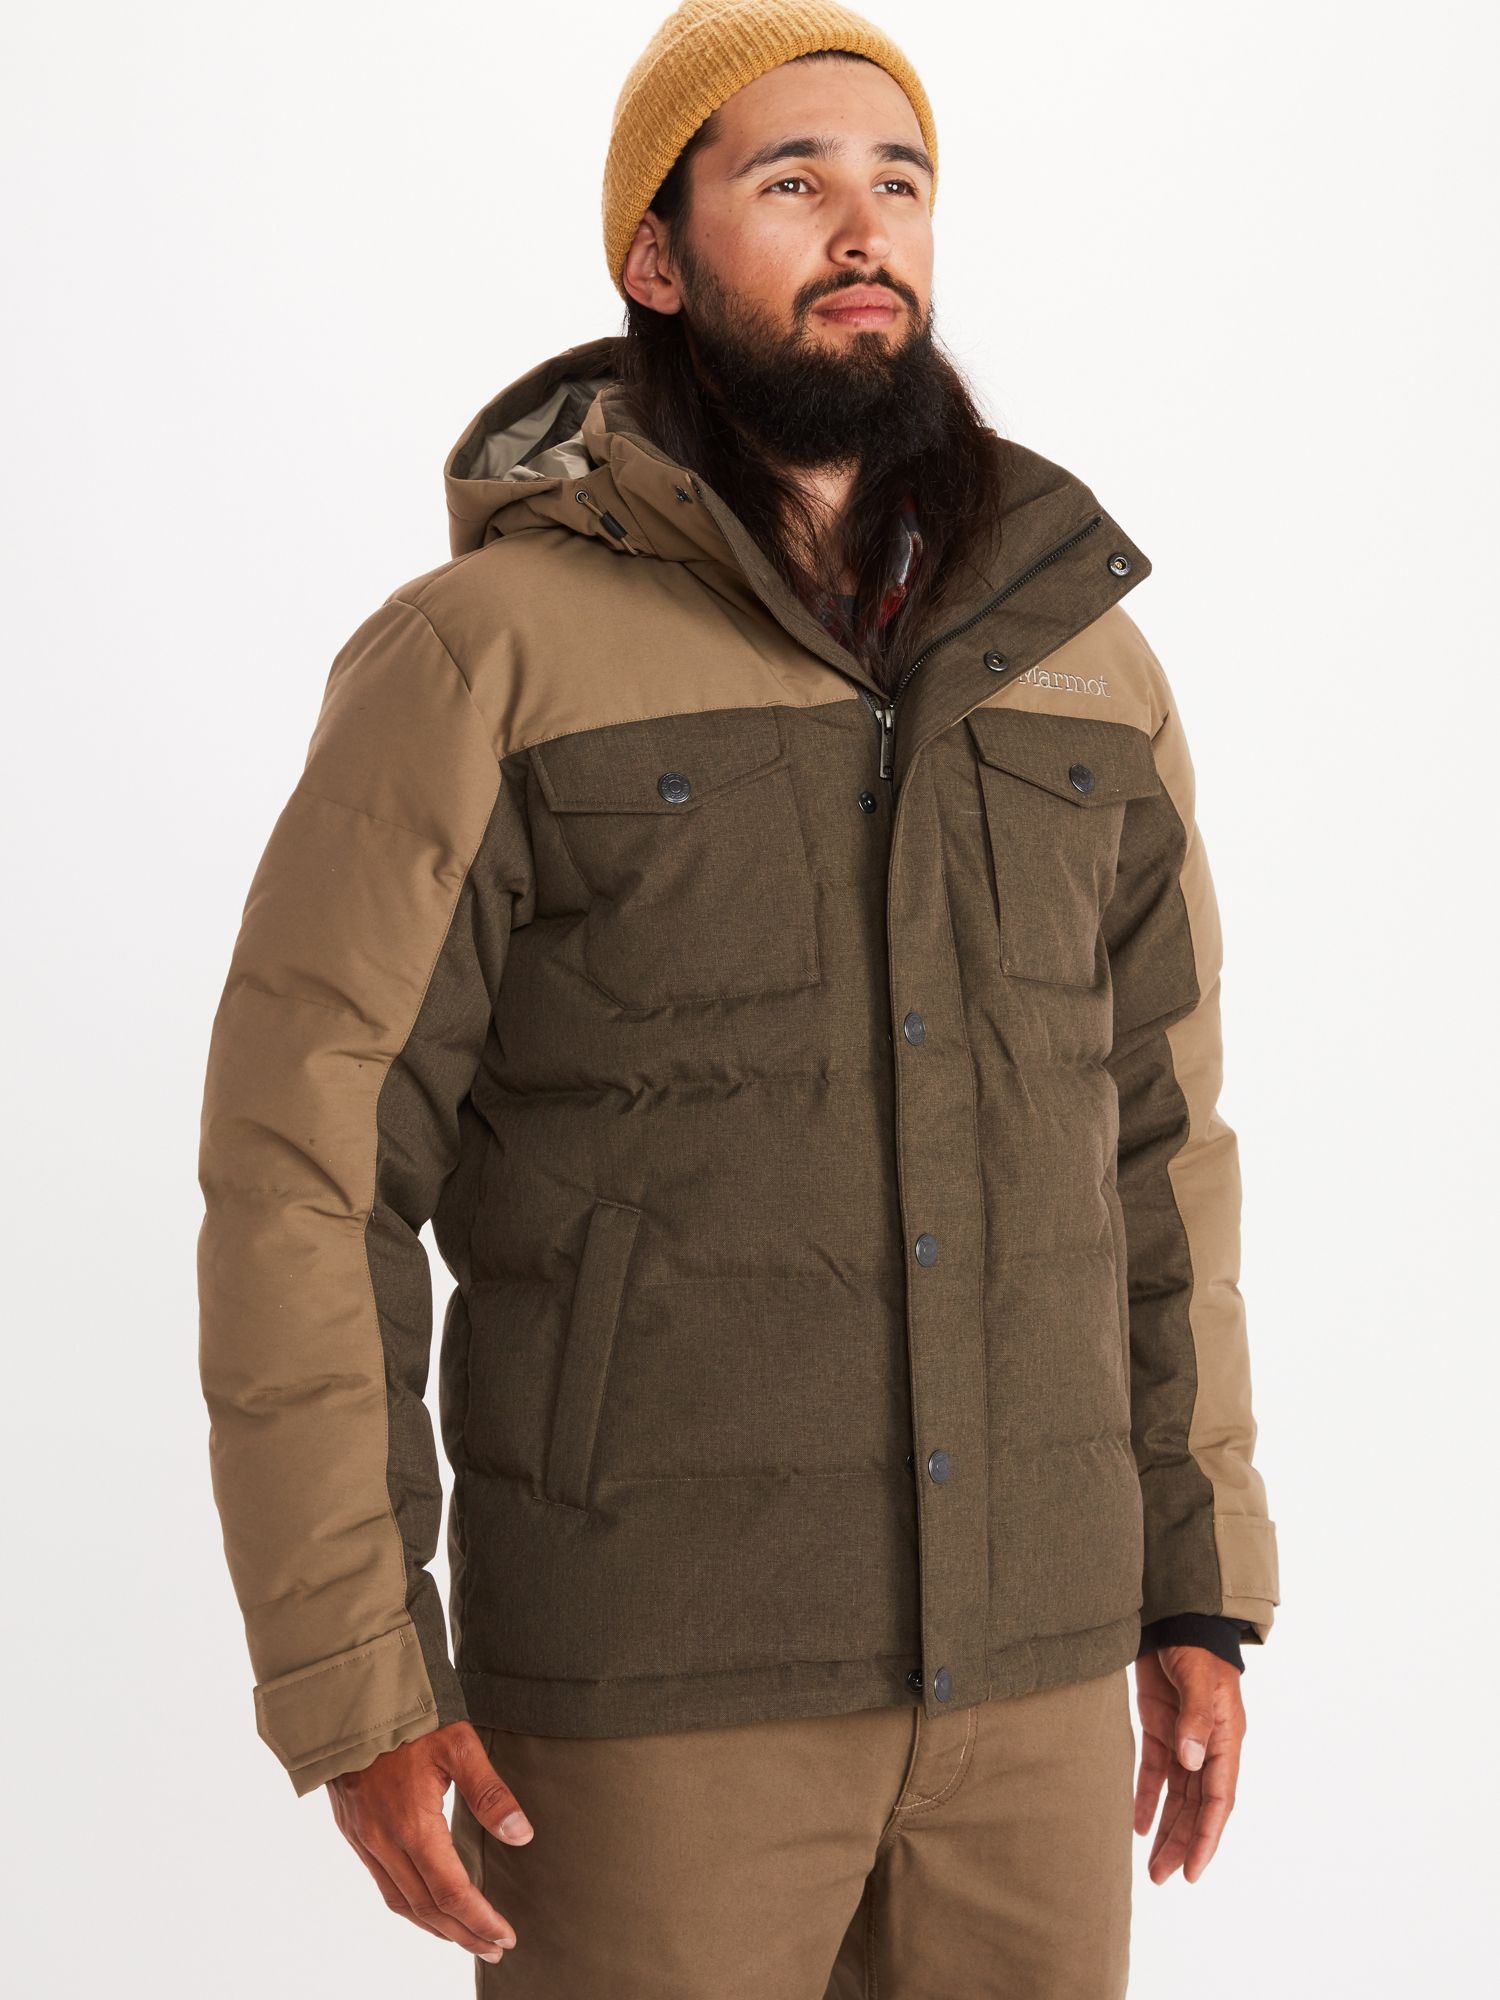 AUTHENTIC MARMOT BOY'S FORDHAM DOWN JACKET DEEP OLIVE ALL SIZES BRAND NEW #73410